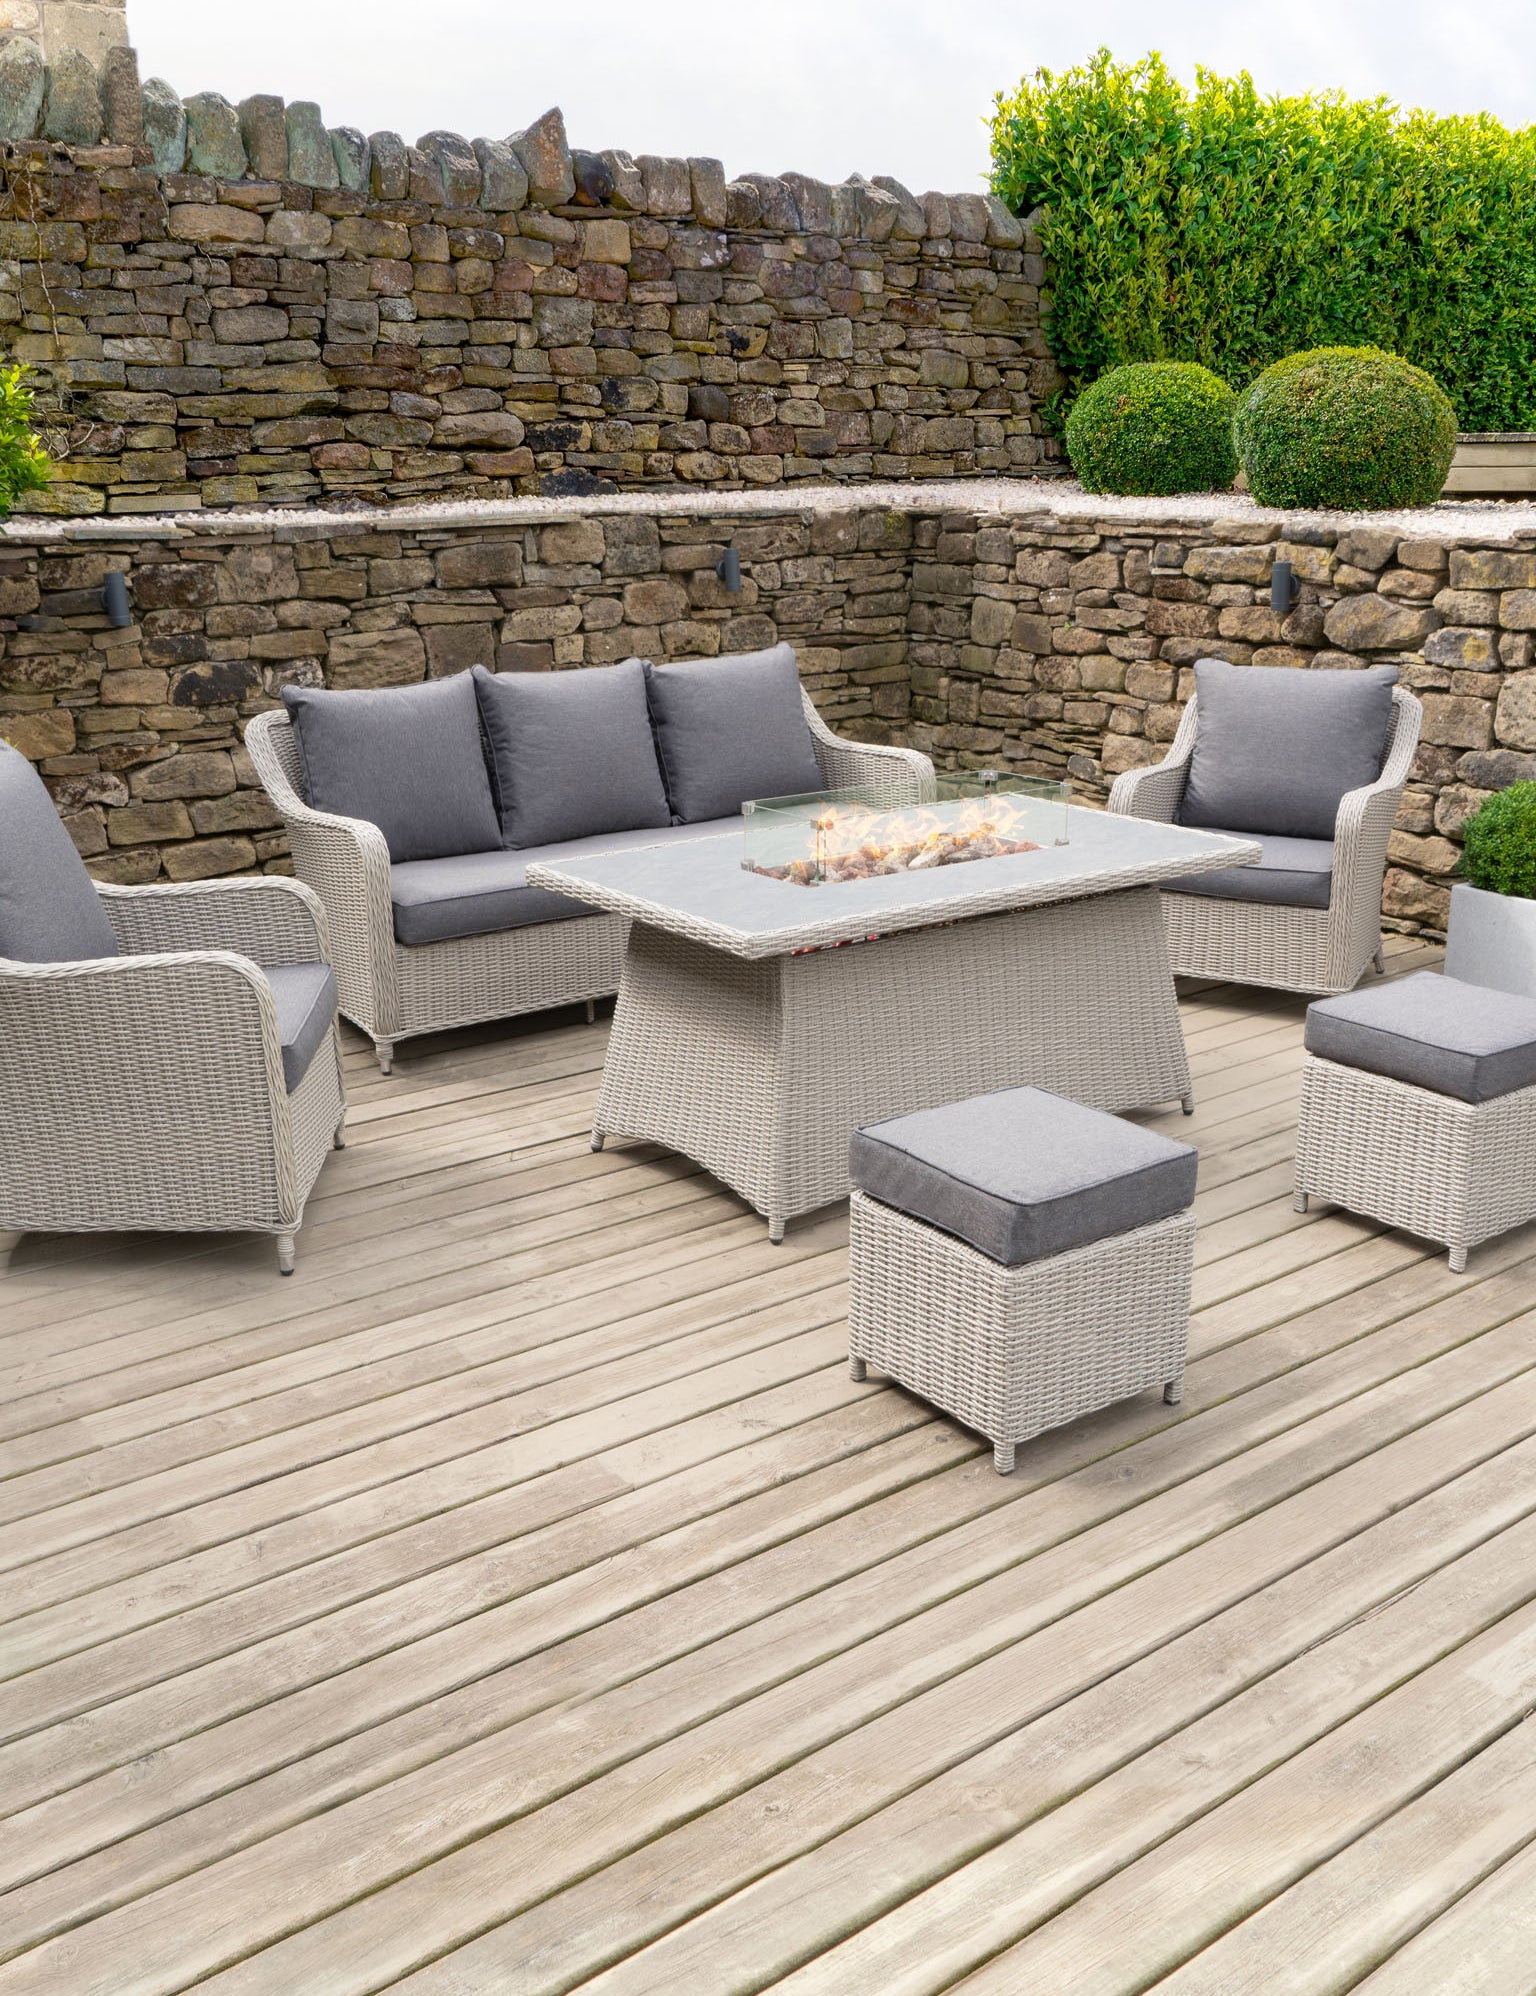 Dining outdoor furniture set is made from a UV protected, weatherproof, synthetic rattan